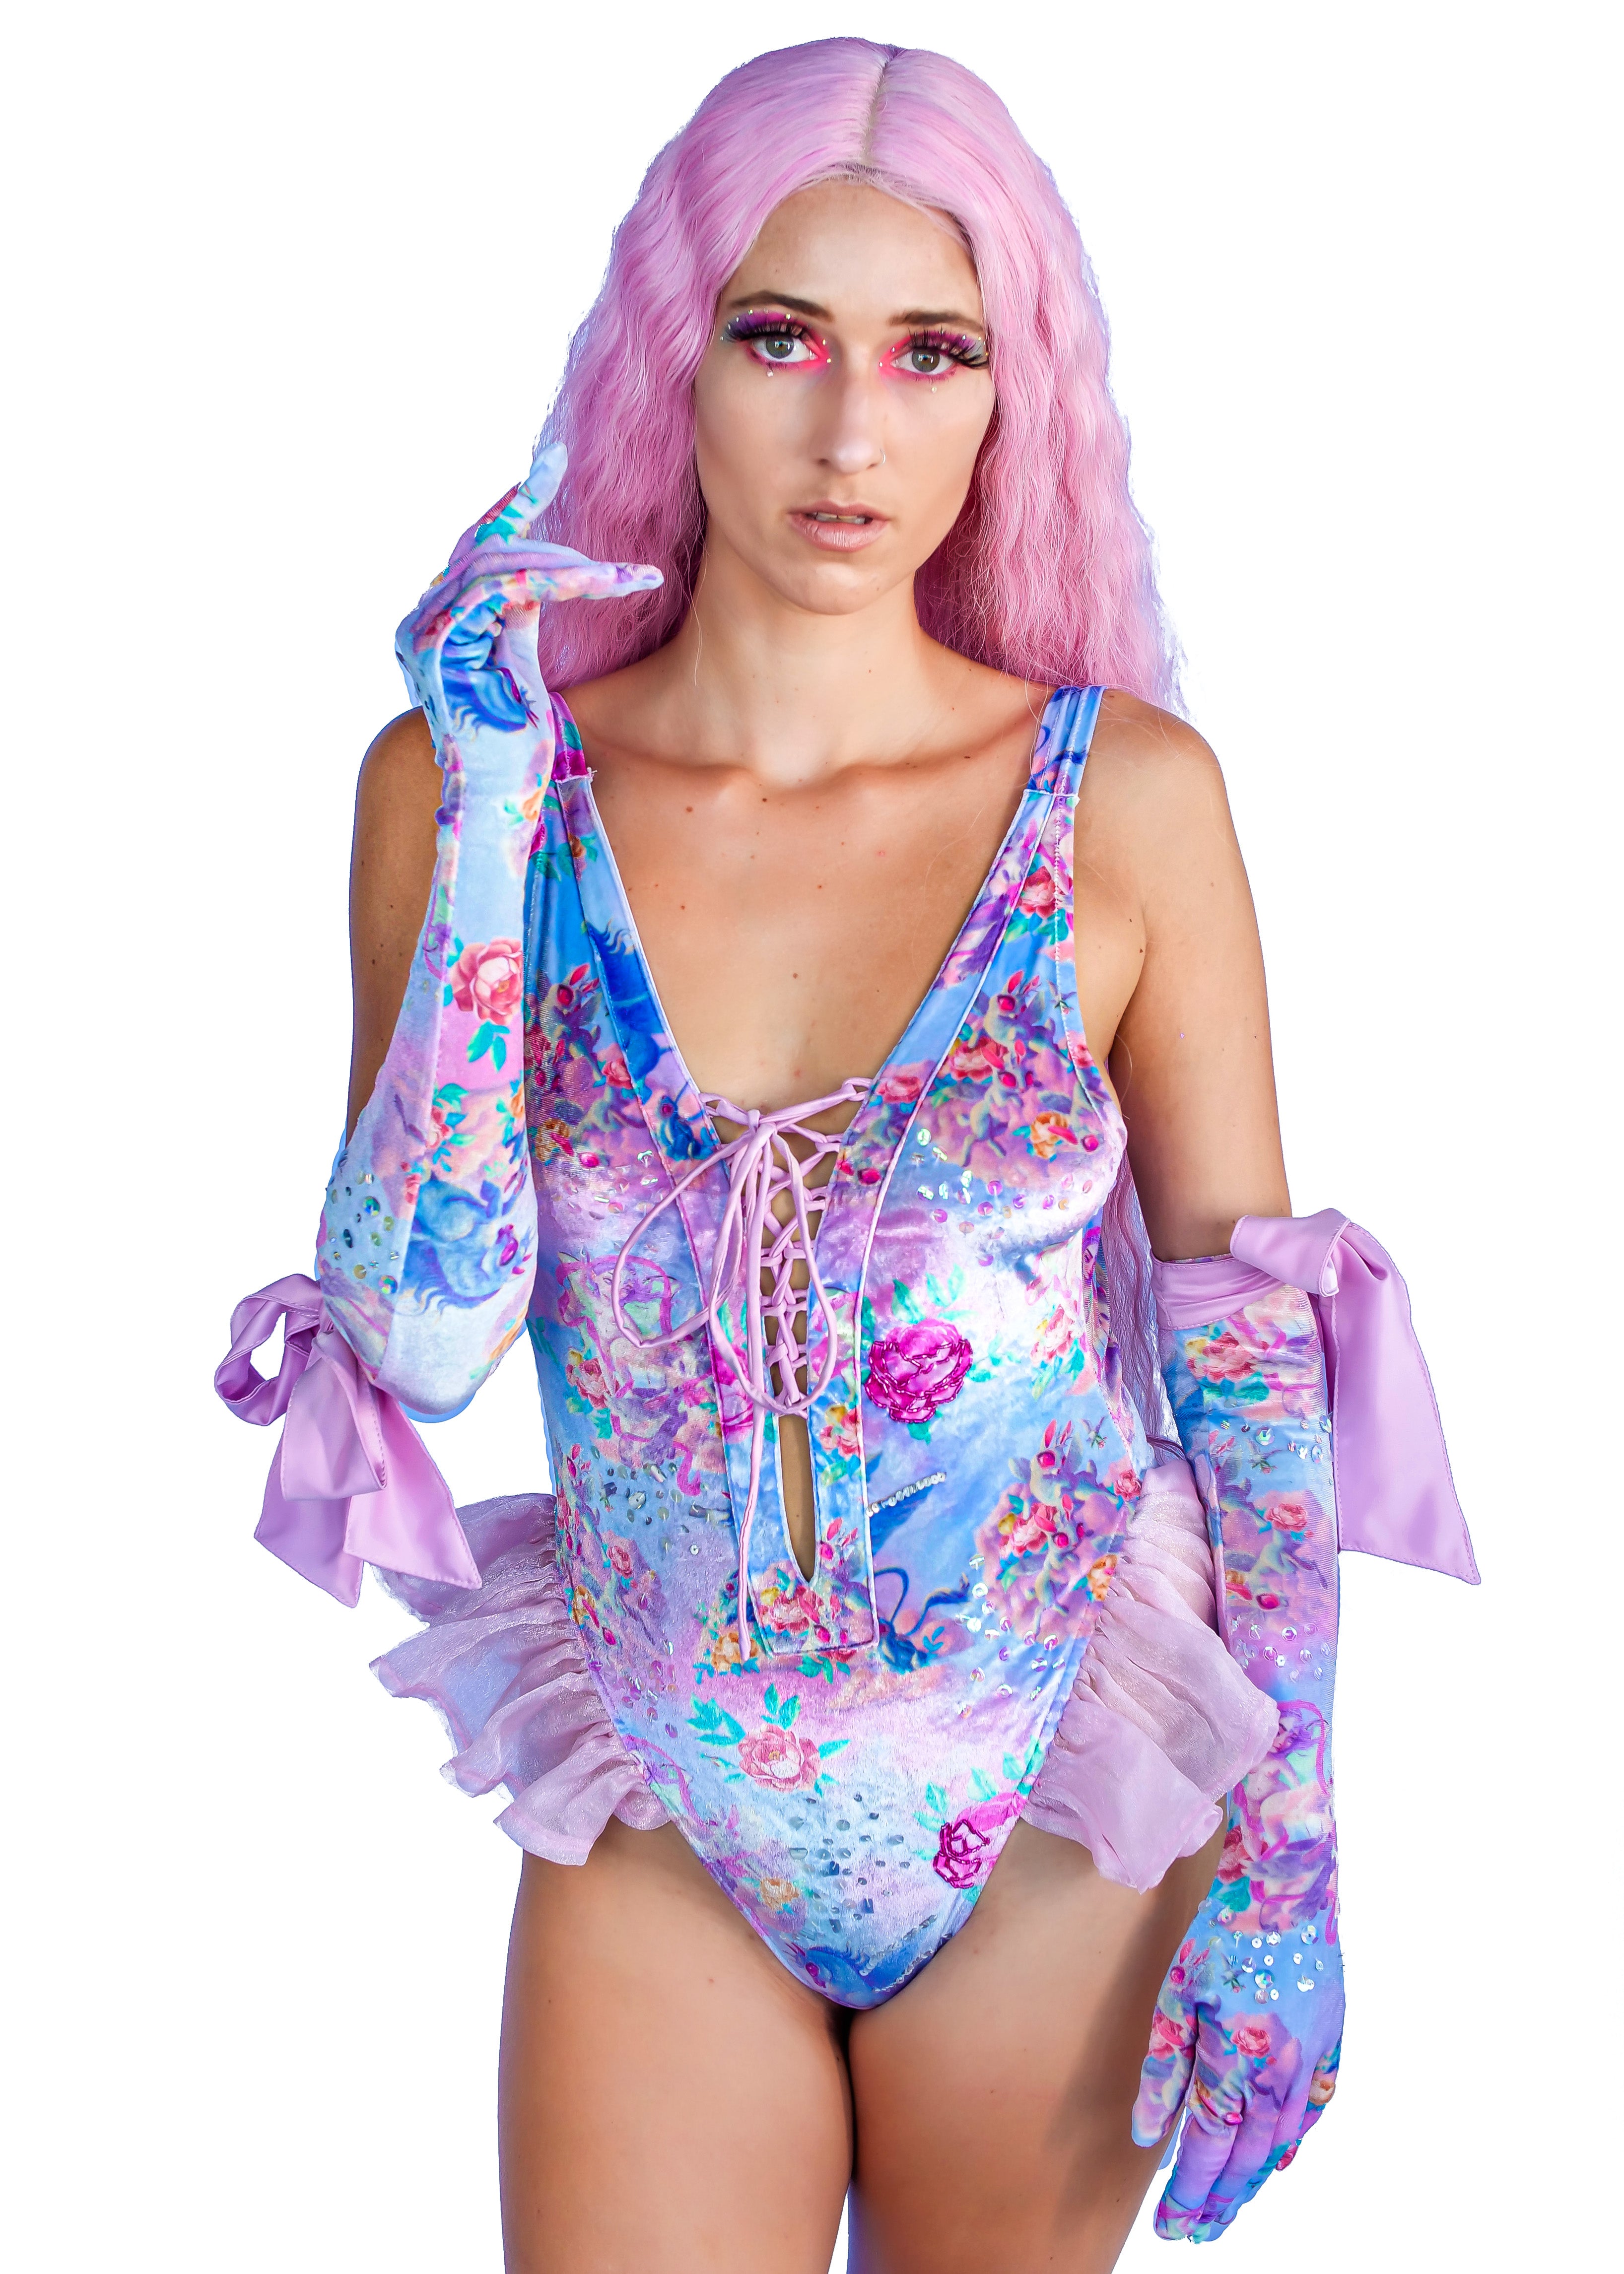 The Mimpi Mystic One-Piece Swimsuit